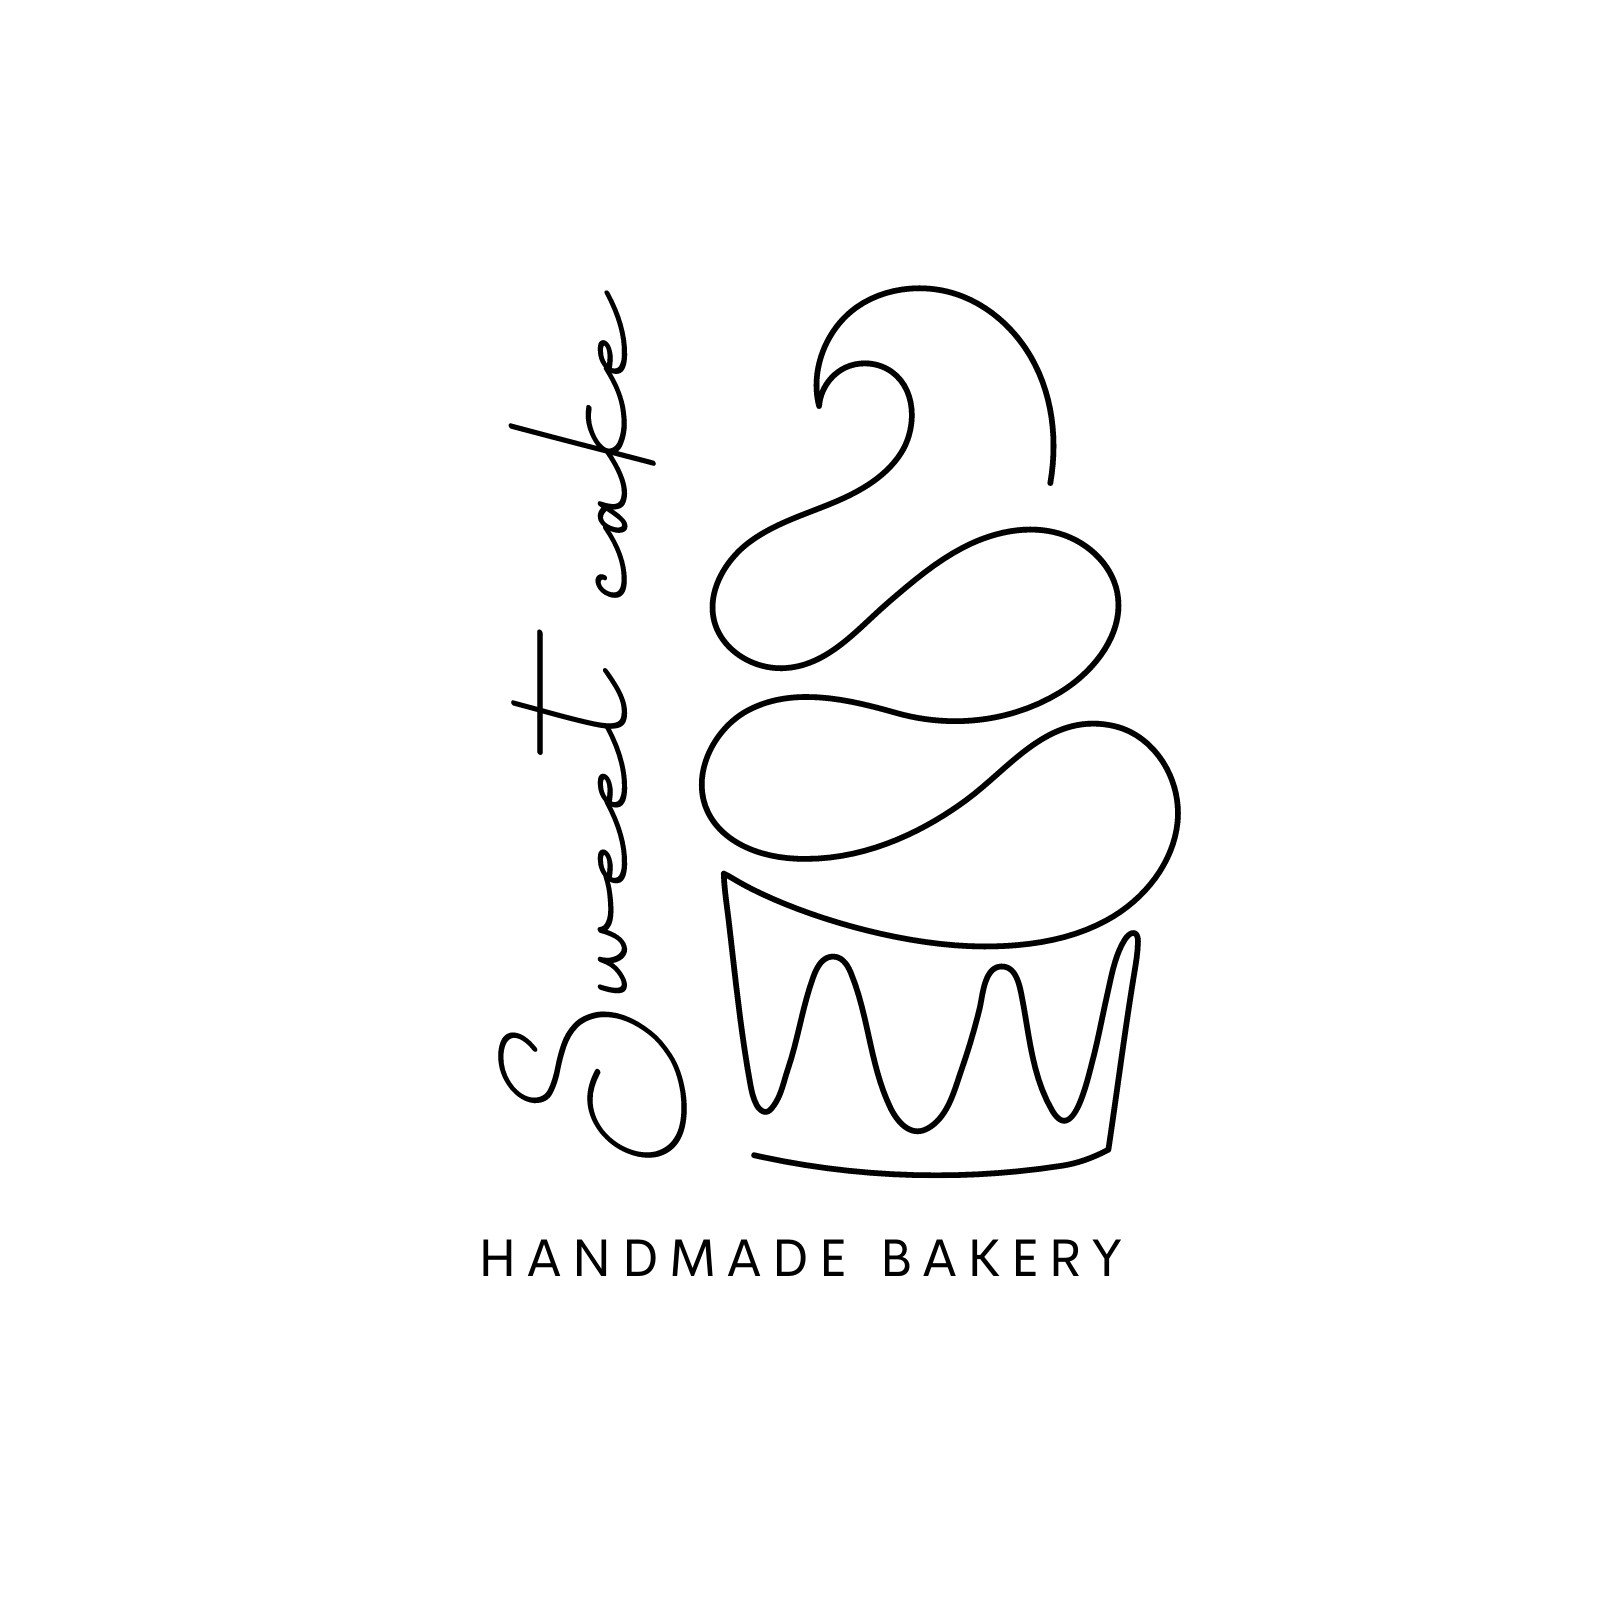 cake shop sweets bake bakery patisserie logo Template | PosterMyWall